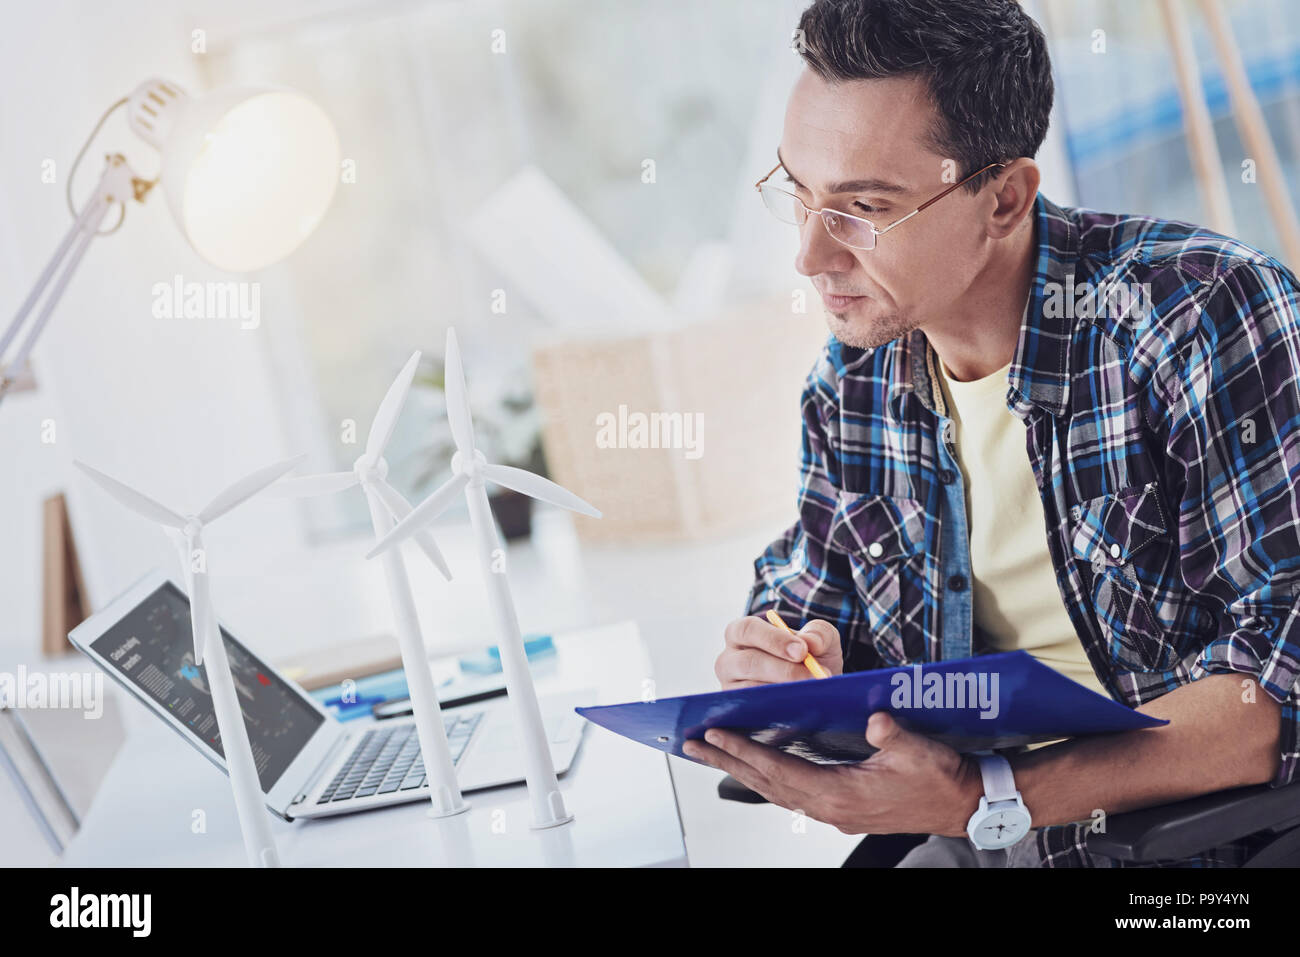 Concentrated brunette man making notes Stock Photo